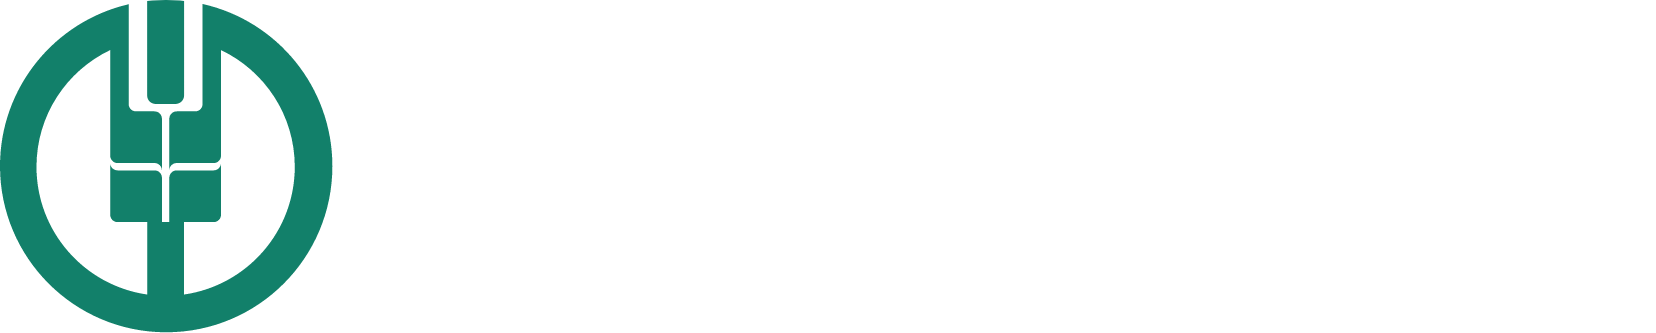 Agricultural Bank of China logo grand pour les fonds sombres (PNG transparent)